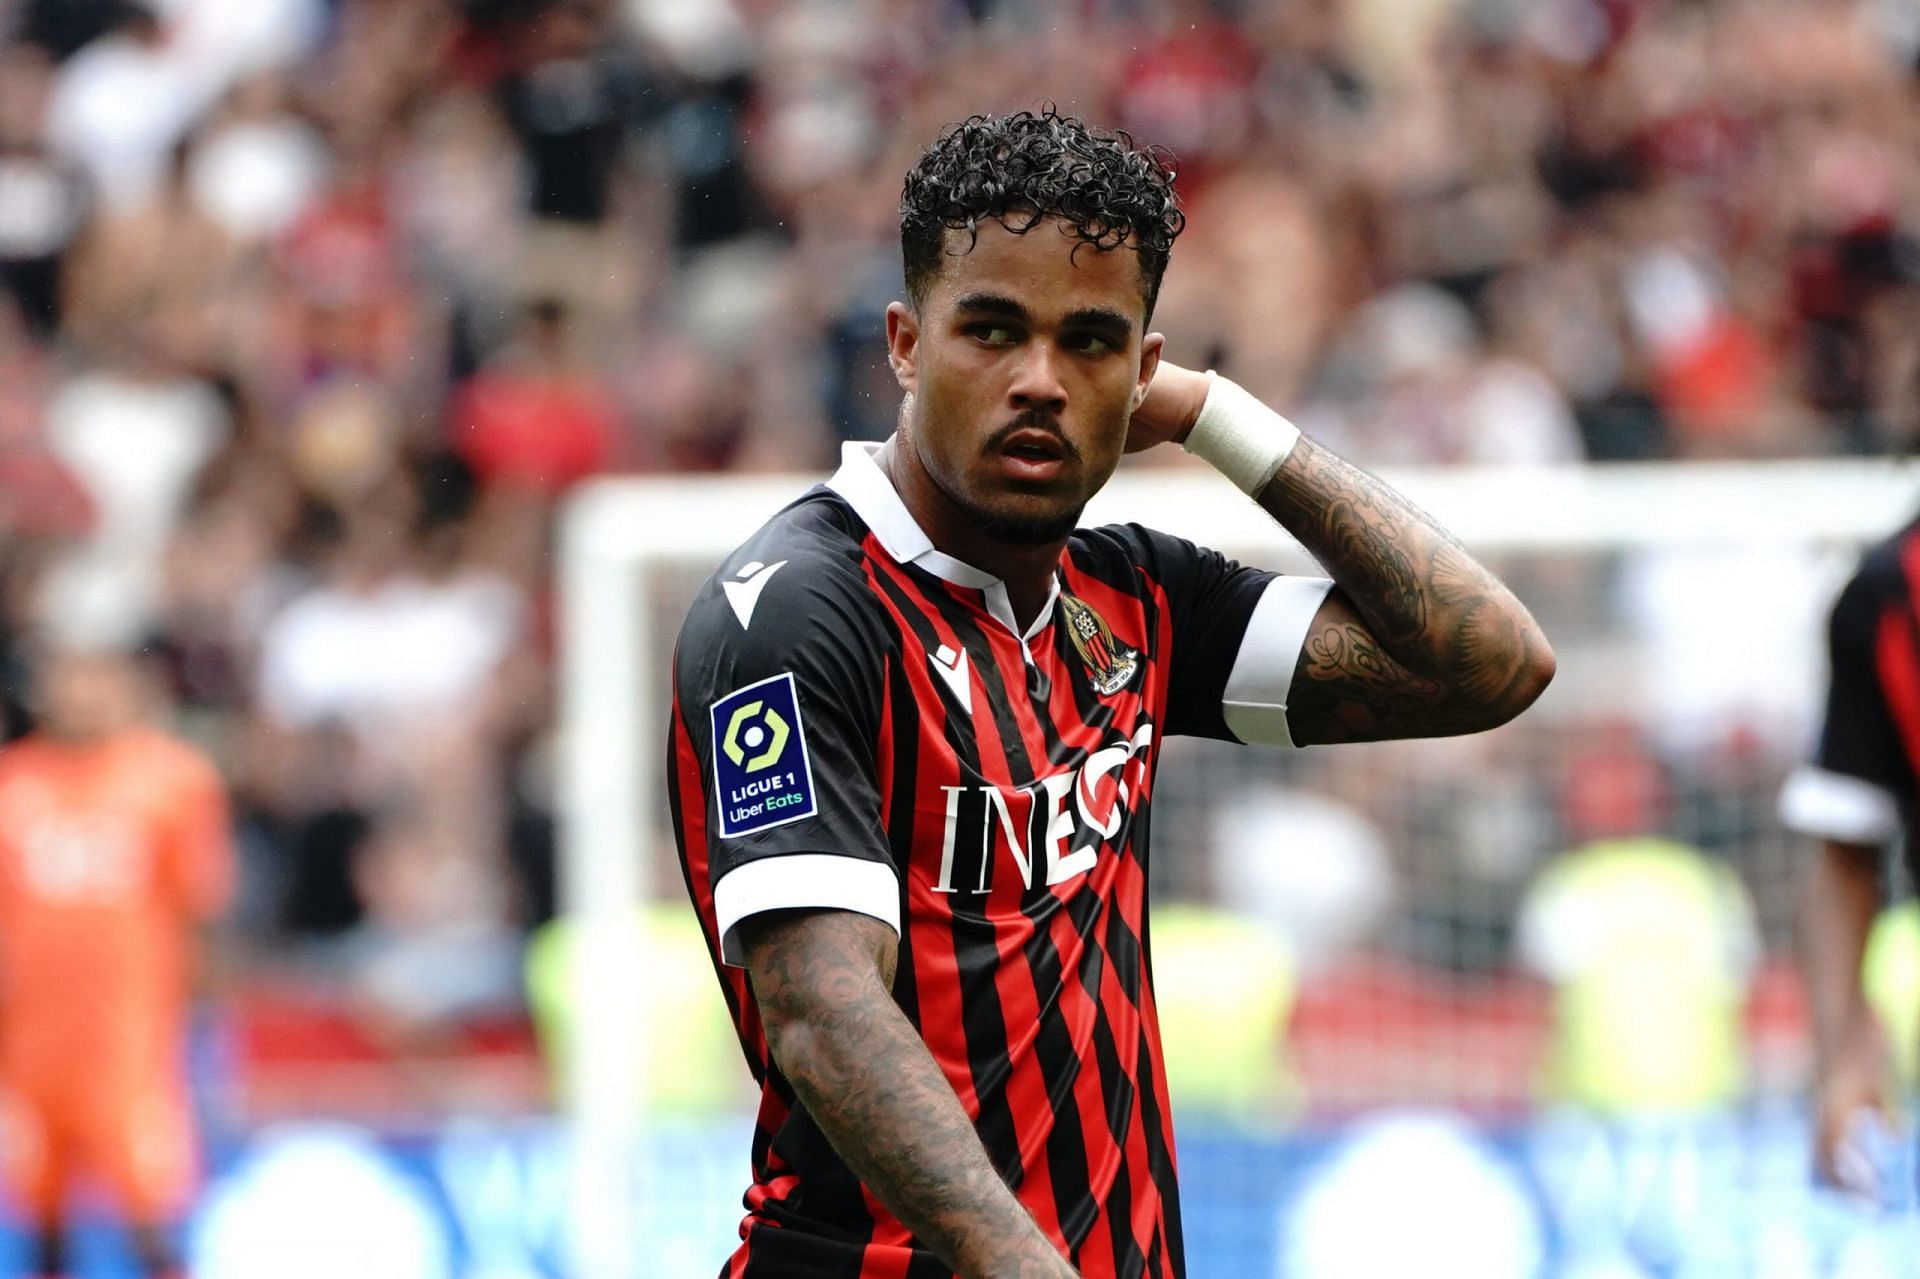 Kluivert will be a huge miss for Nice